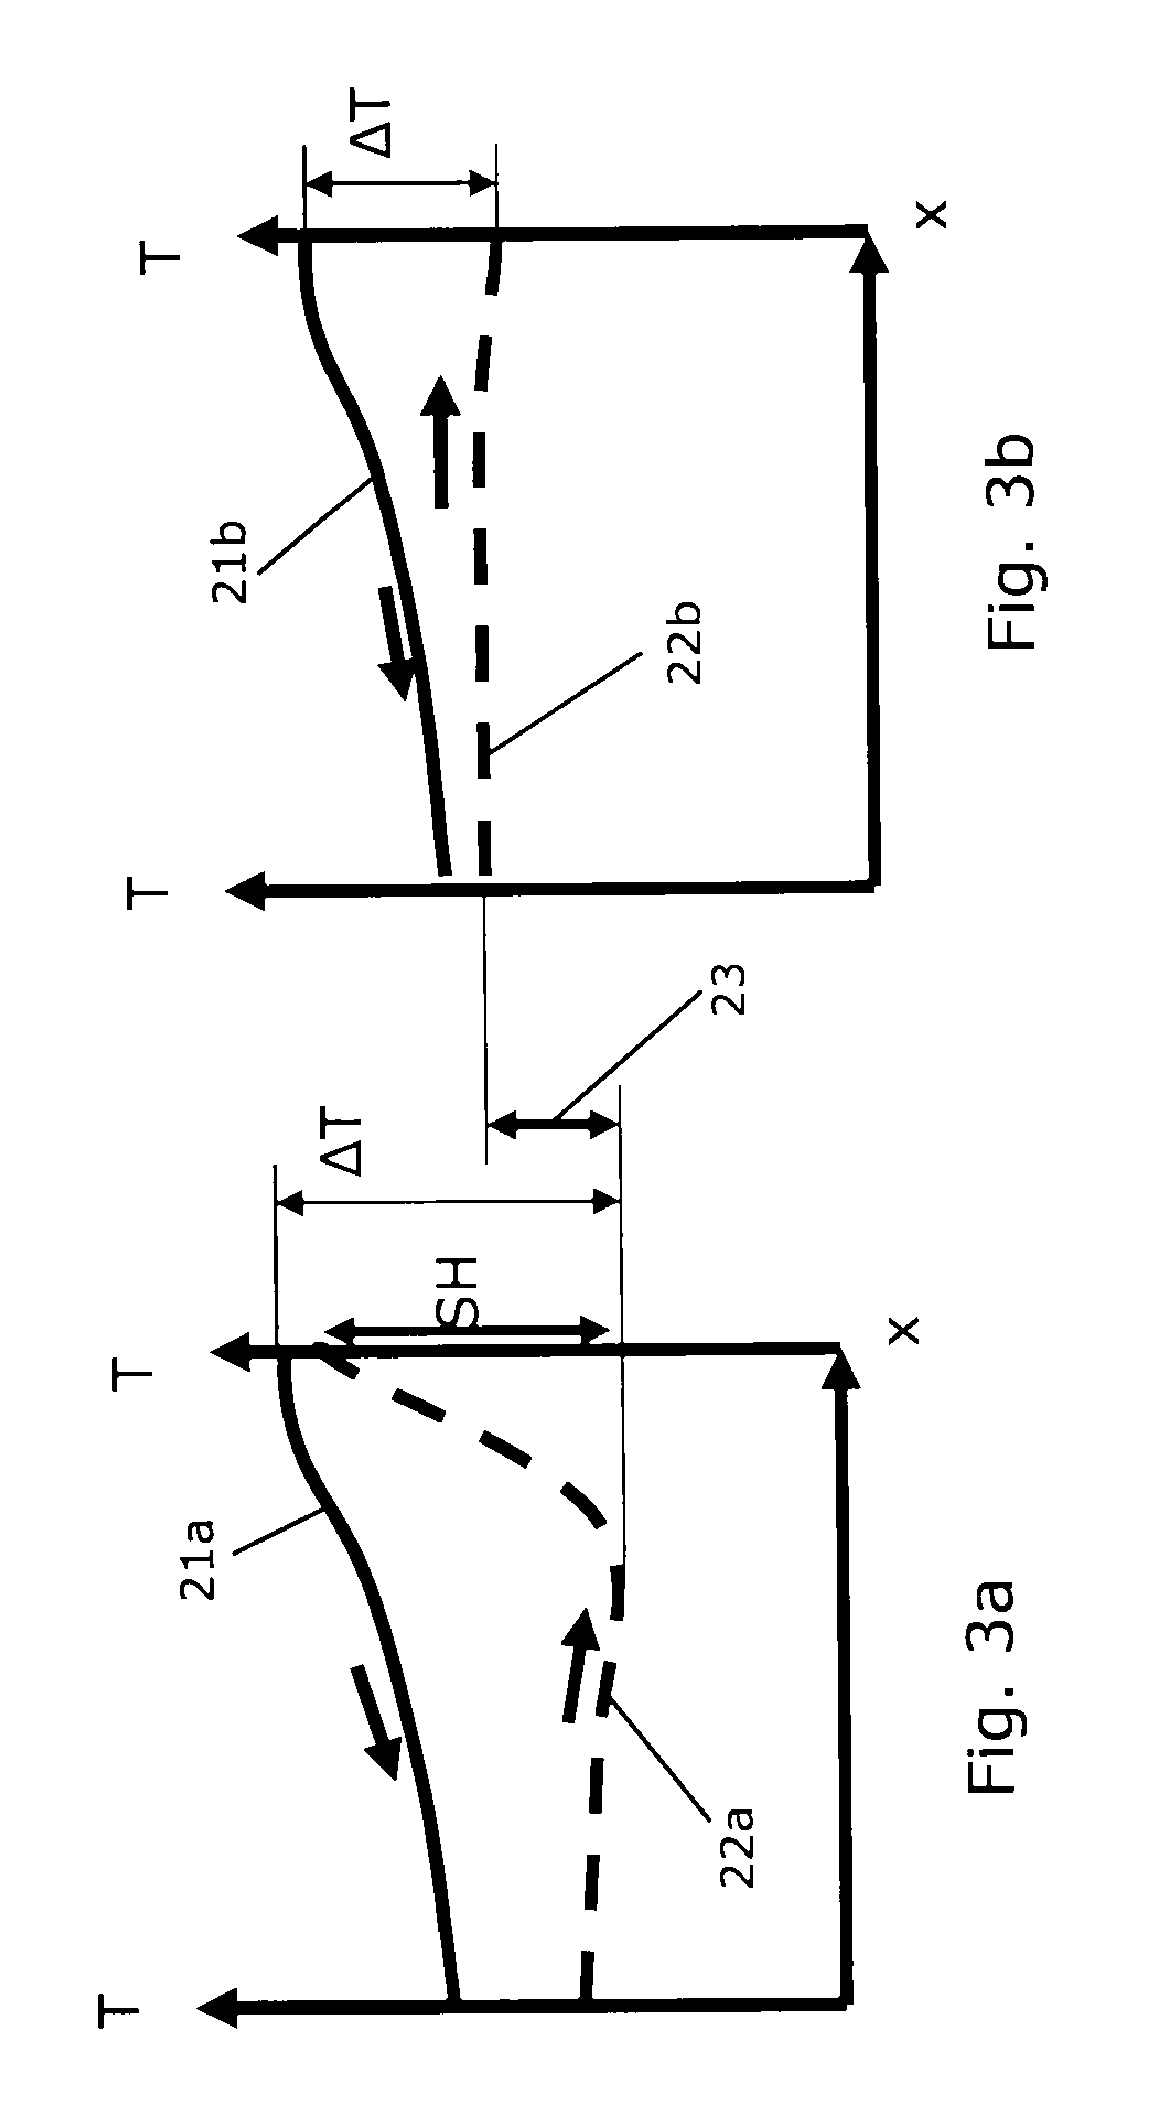 Method for operating a vapour compression system using a subcooling value